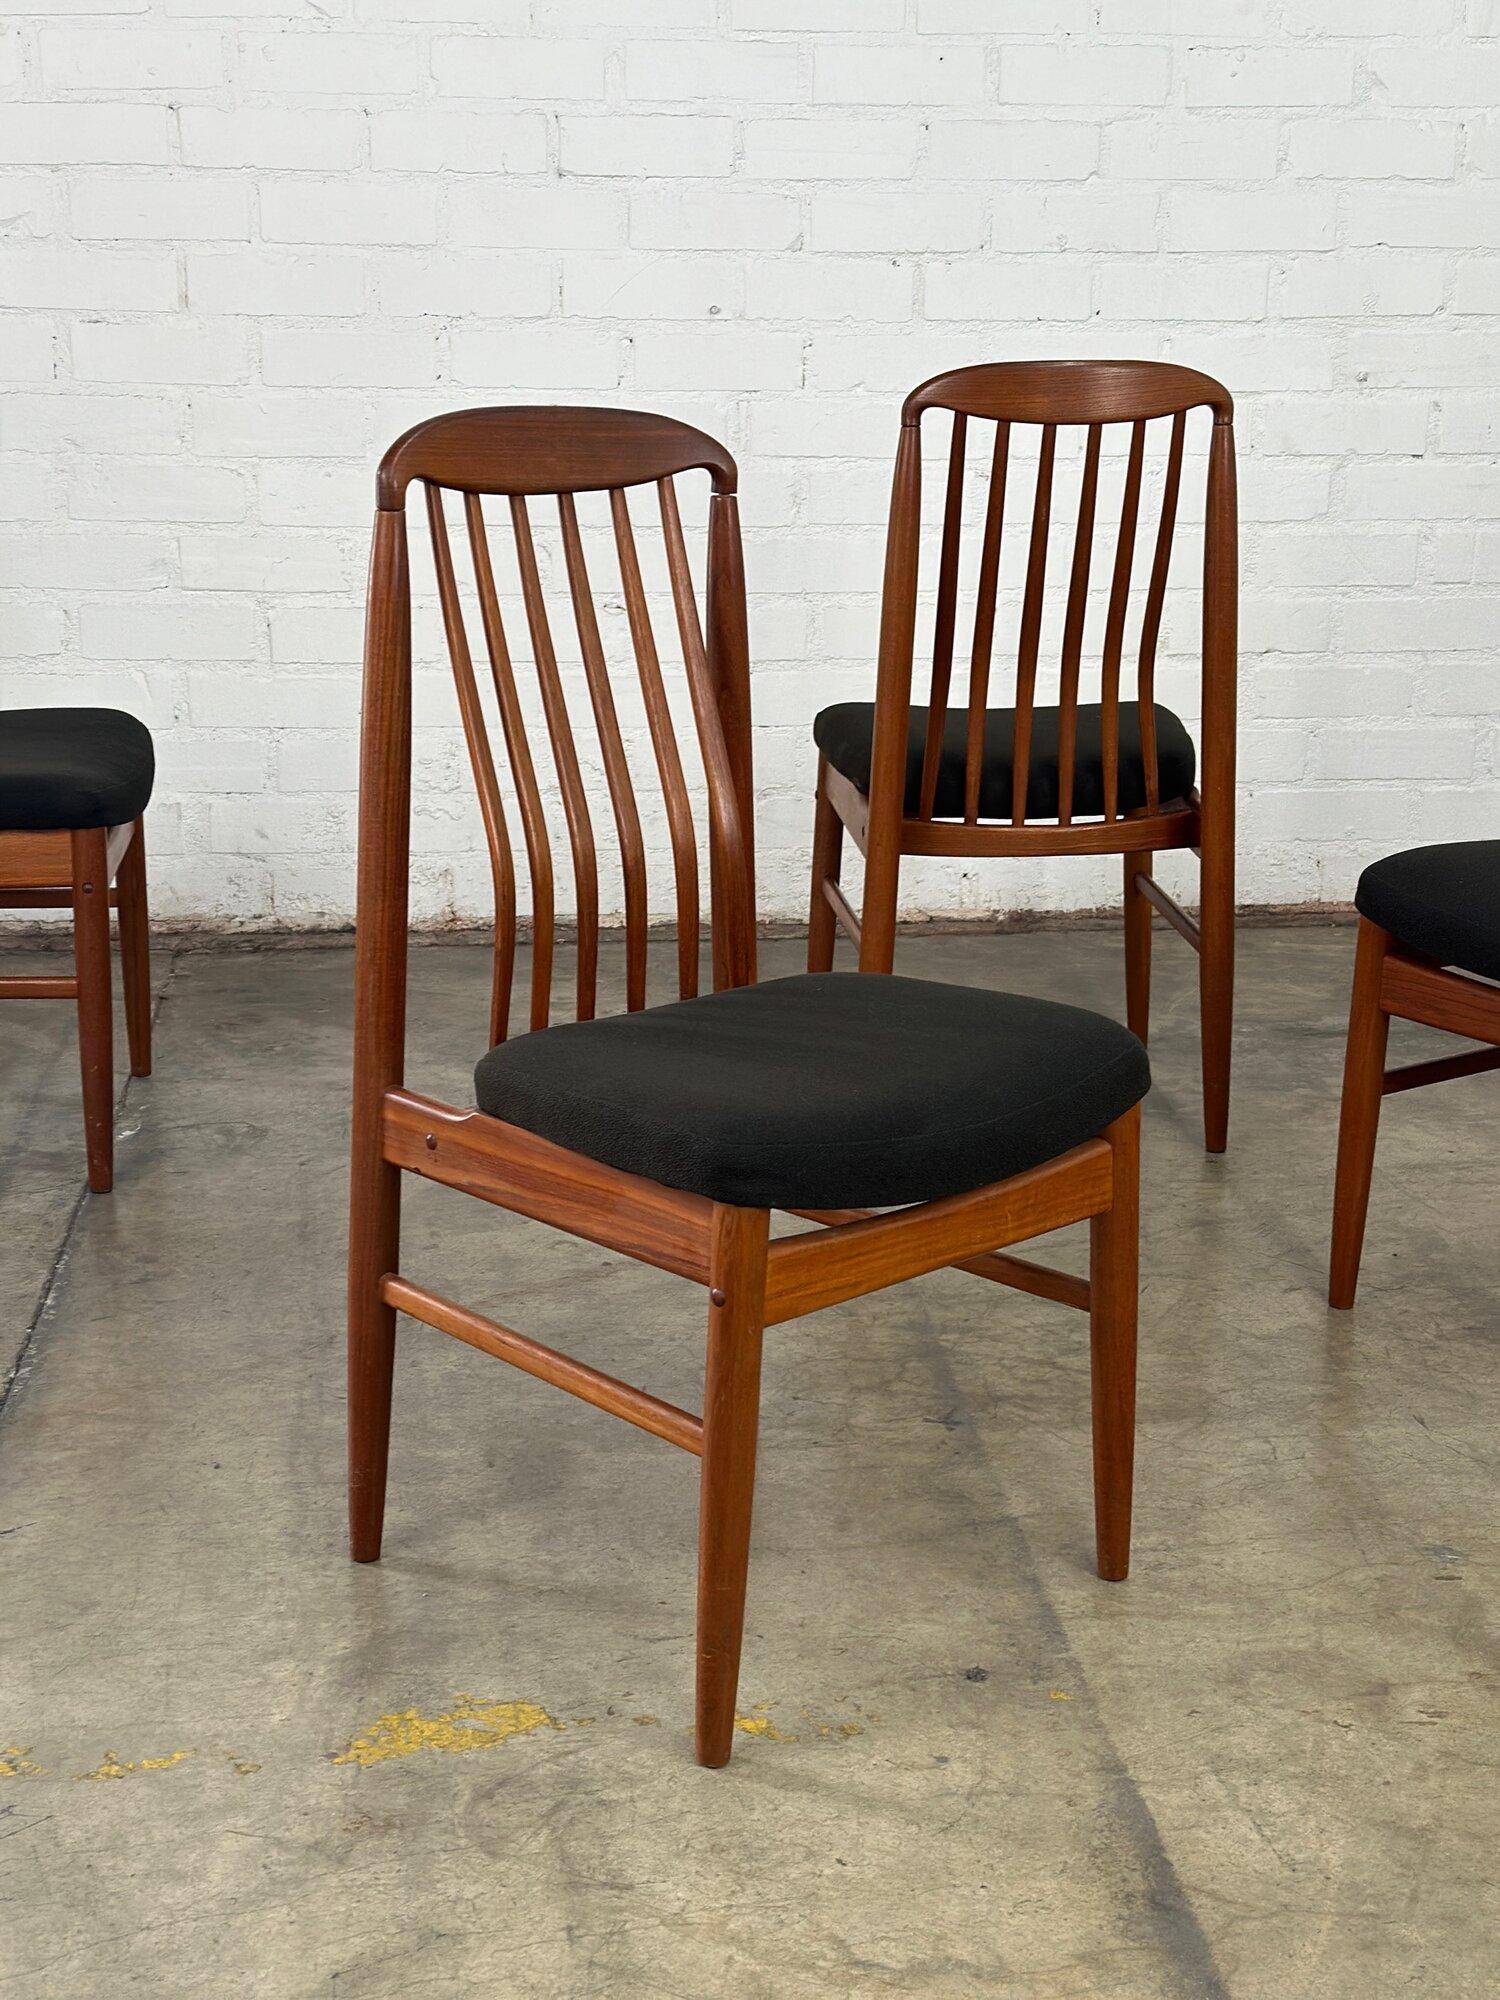 W18.5 D19 H37 SW18 SD16 SH18.5

Set of four strong and sturdy dining chairs in great condtion. Upholstery was recently updated by previous owners and shows well with no visible rips or tears. Teak frames shows light discolartion to finish but no